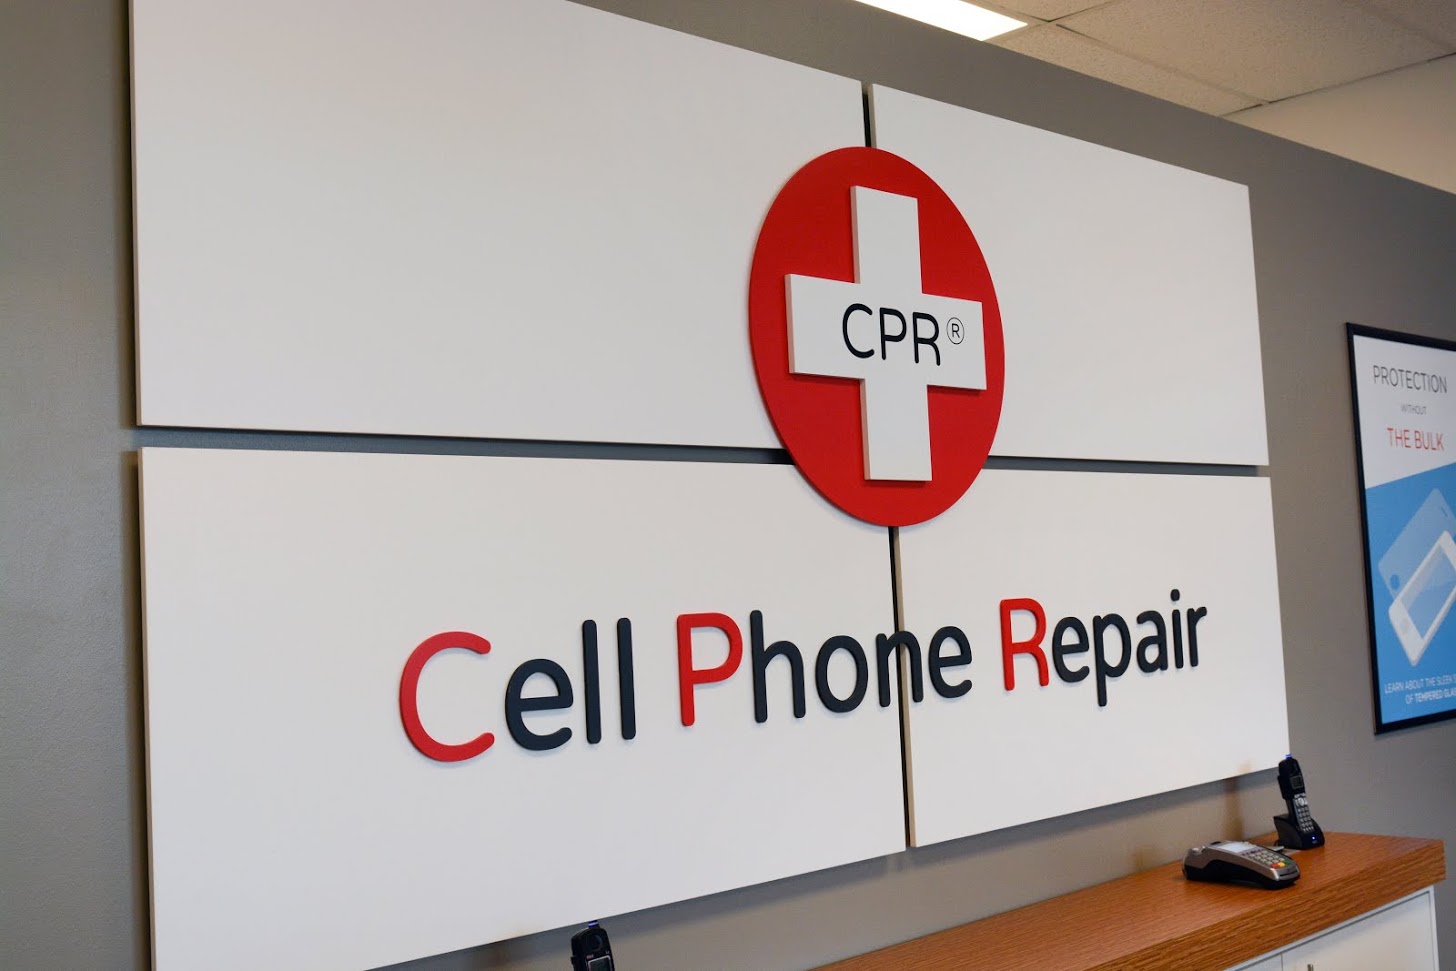 CPR Cell Phone Repair, Friday, October 19, 2018, Press release picture